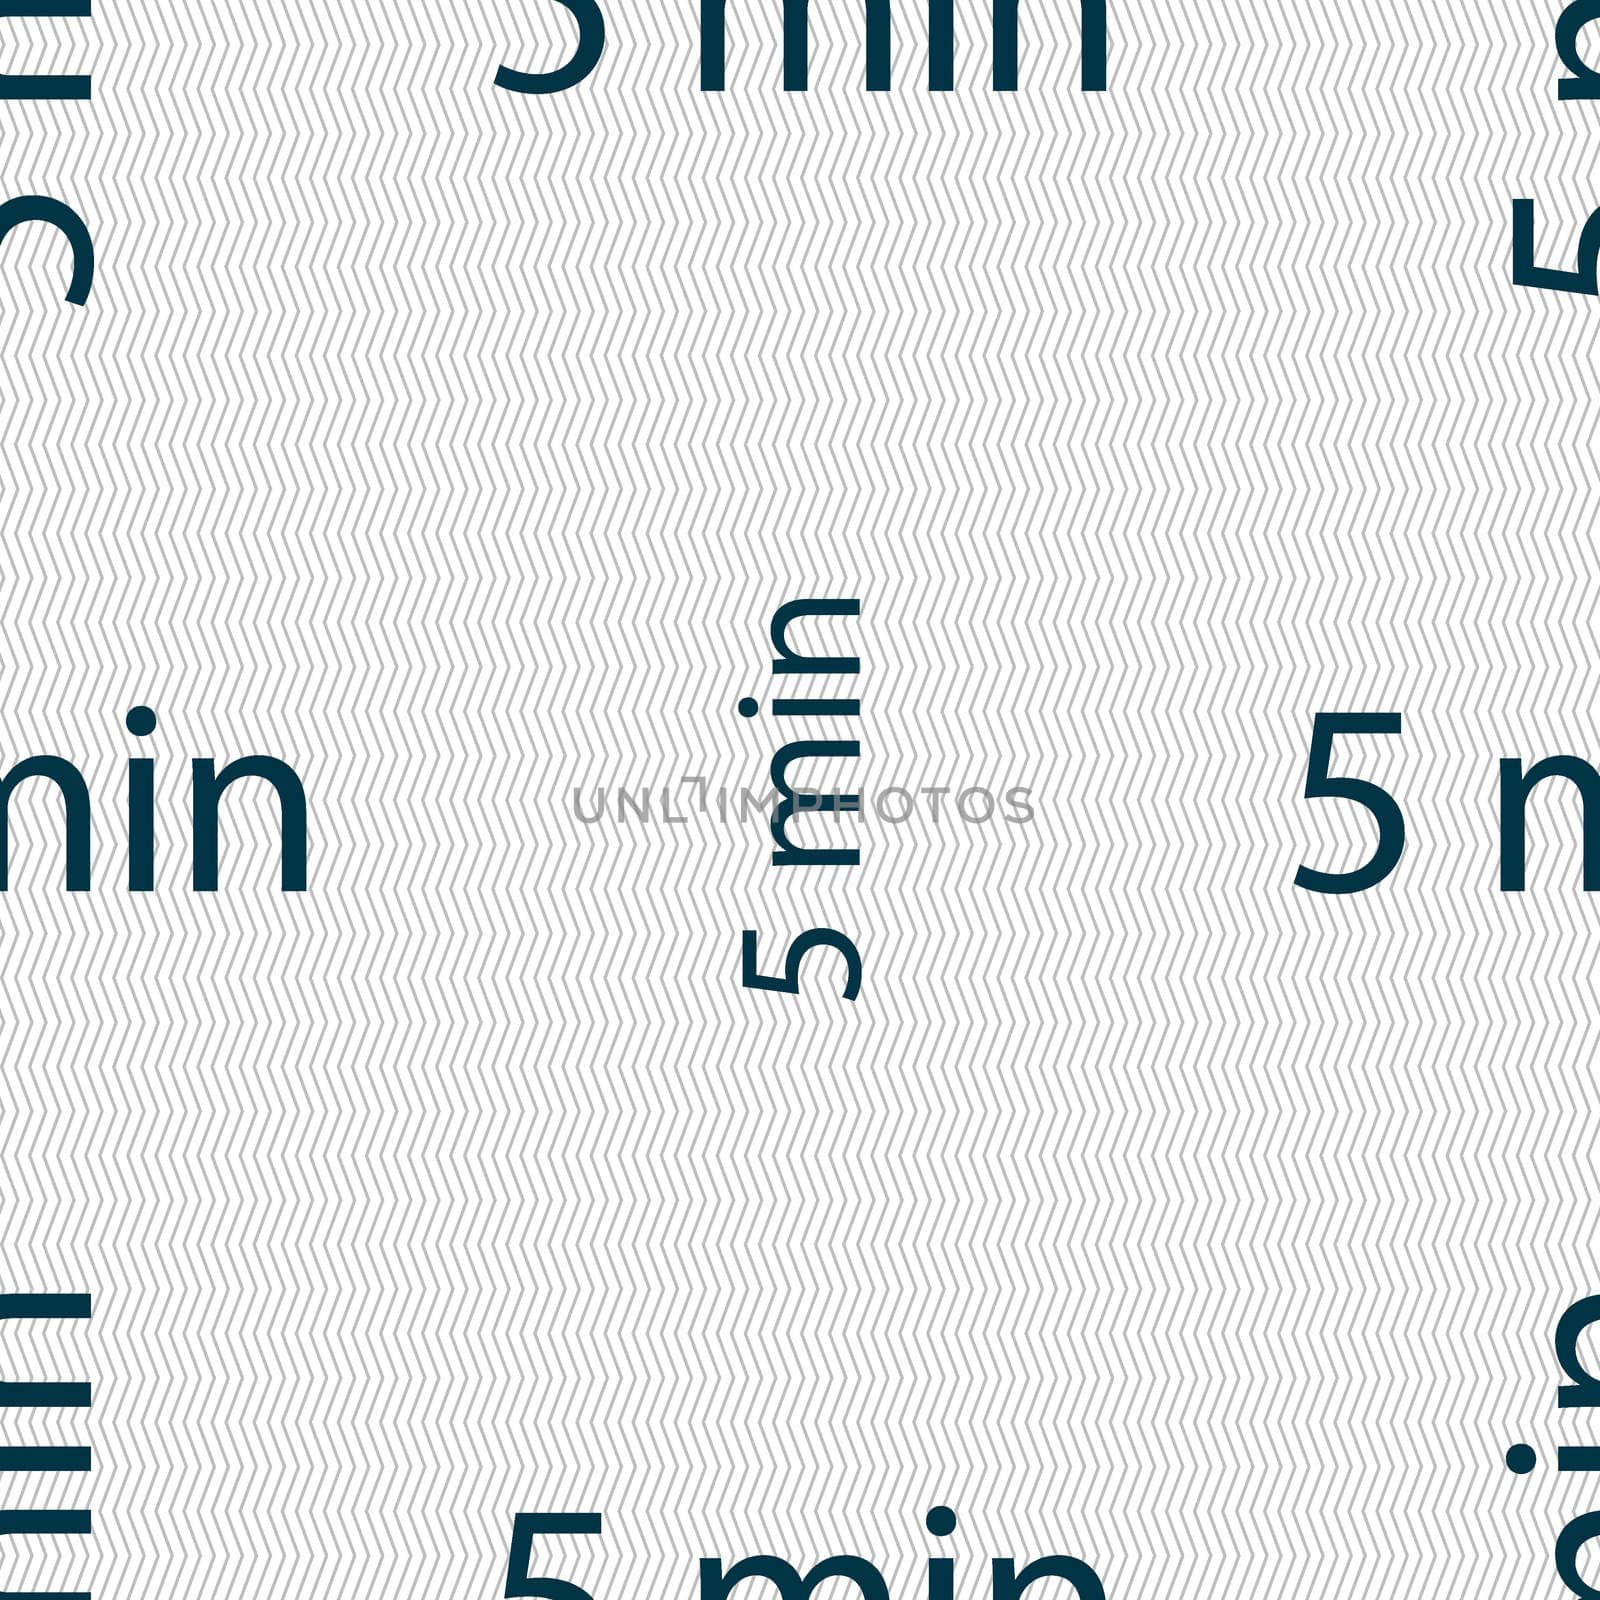 5 minutes sign icon. Seamless abstract background with geometric shapes. illustration